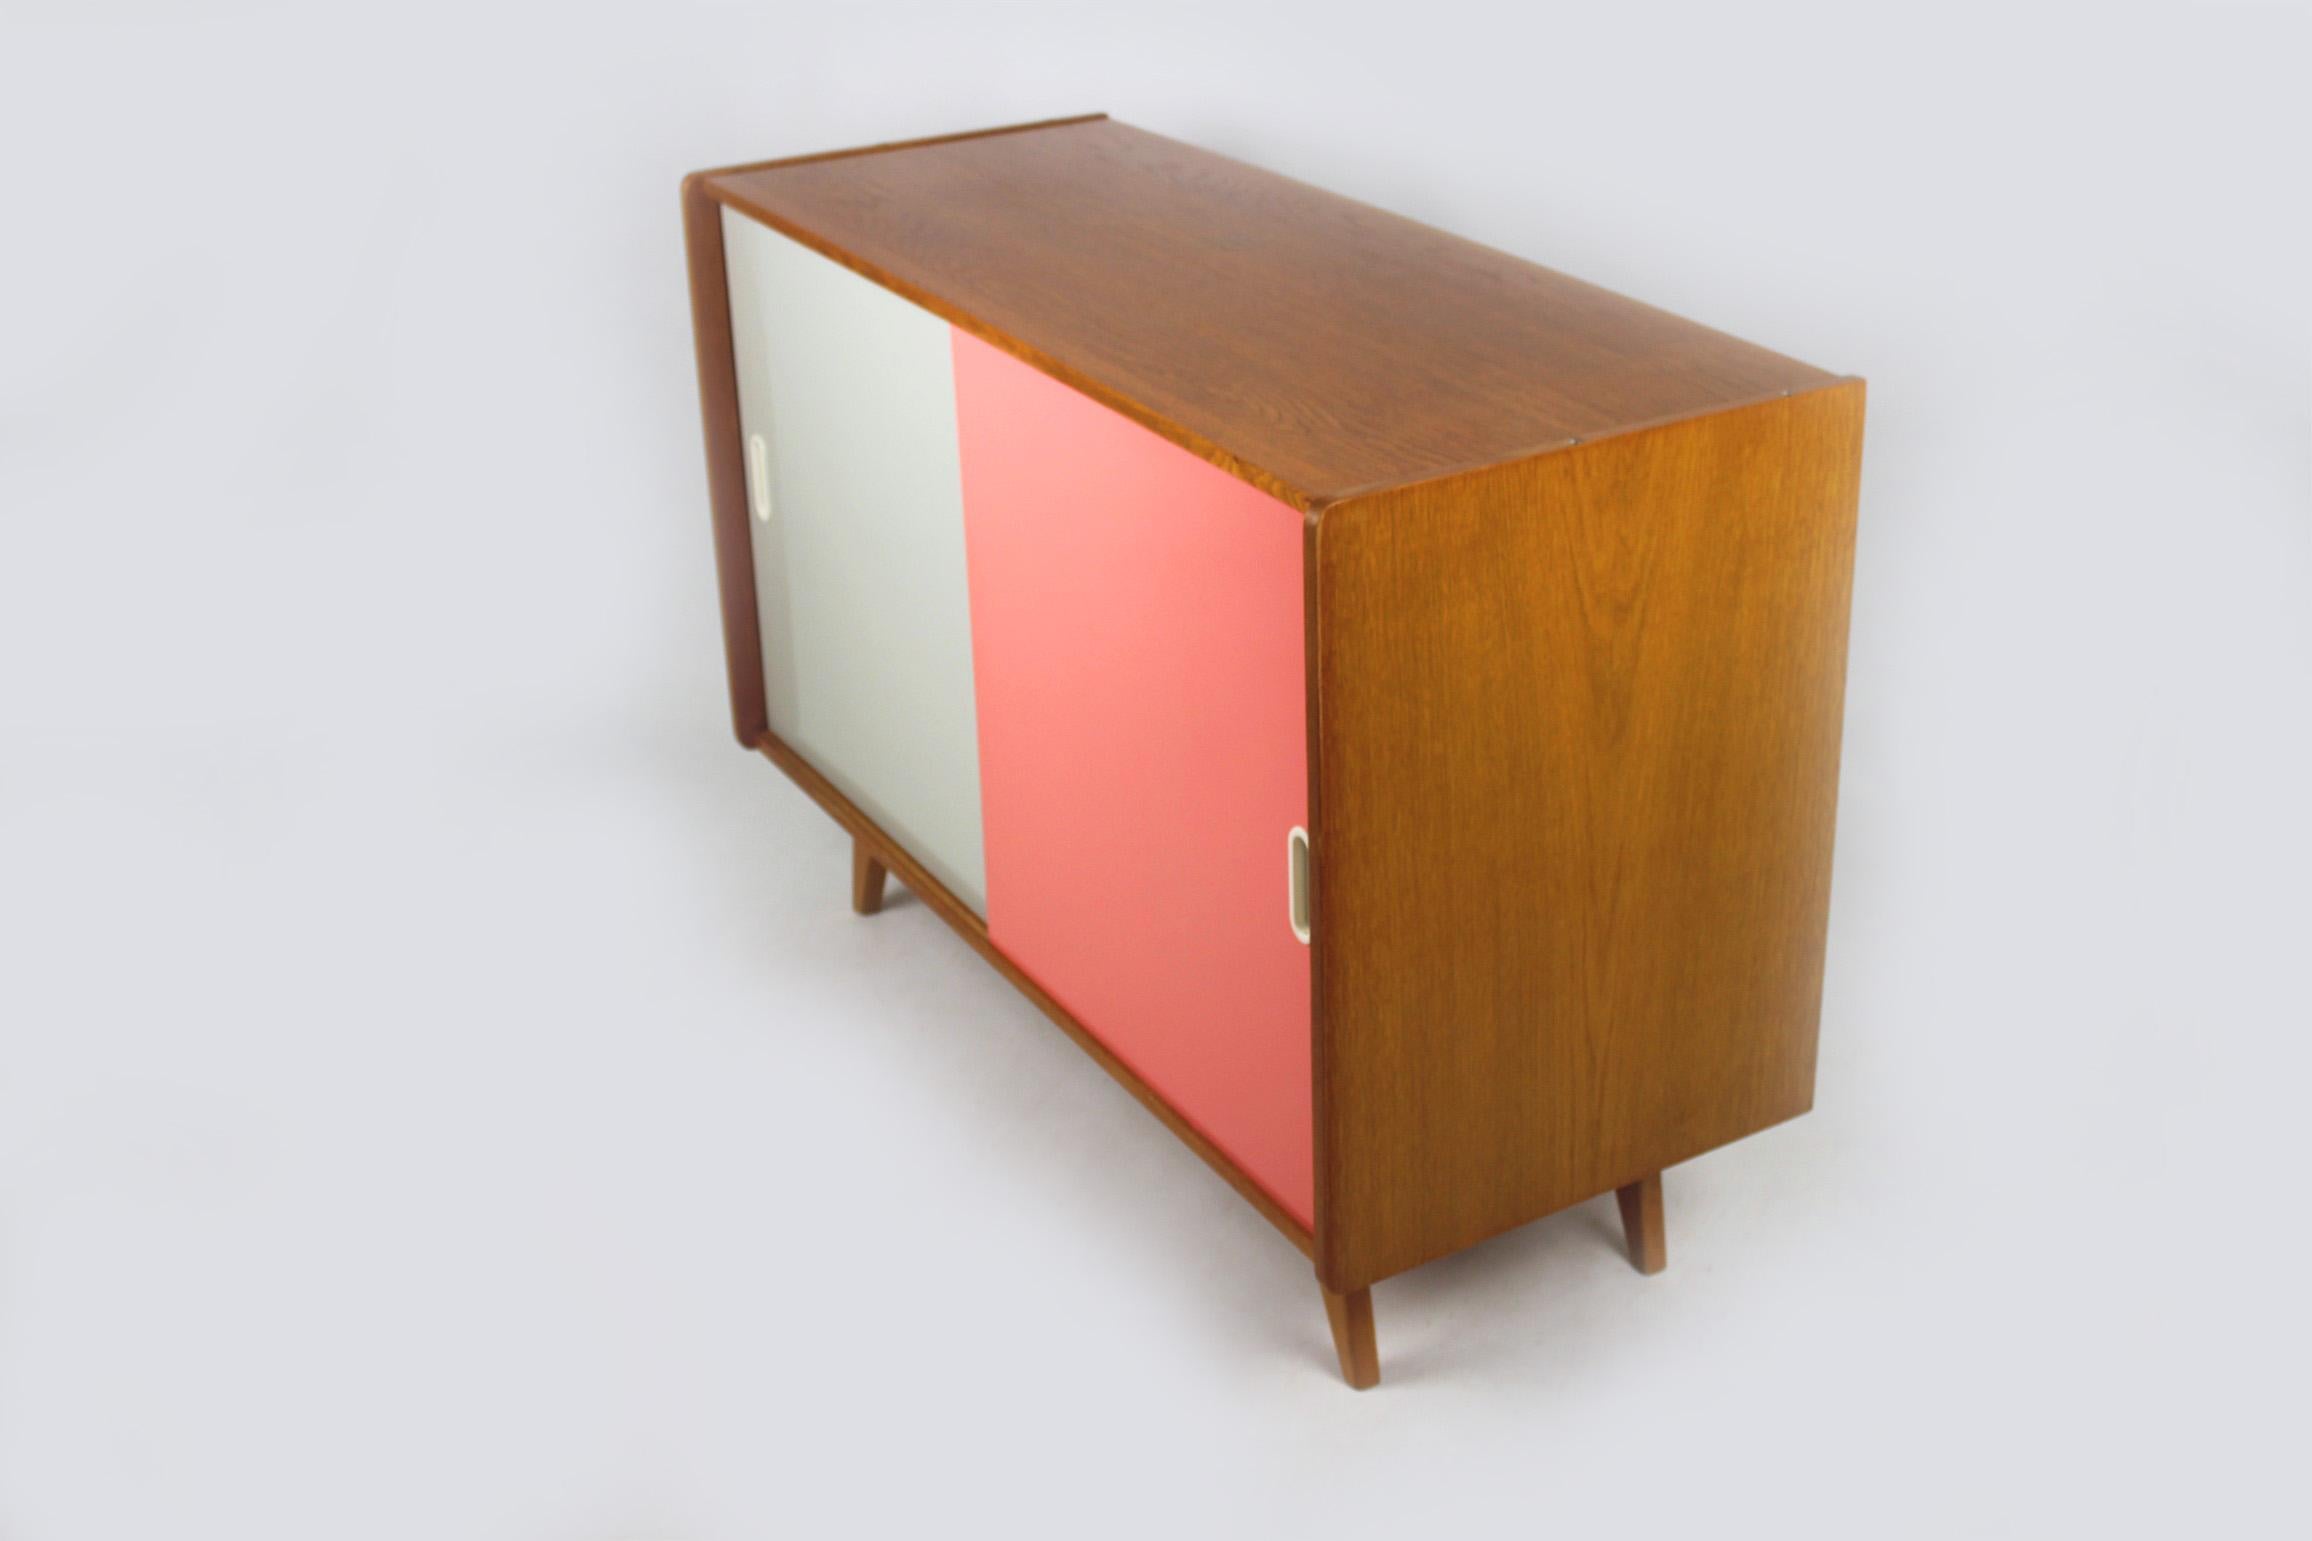 This midcentury wooden sideboard with slide doors was designed by Jirí Jiroutek for Interiér Praha in the 1960s.
Features one long shelf inside and original pink and grey formica fronts.